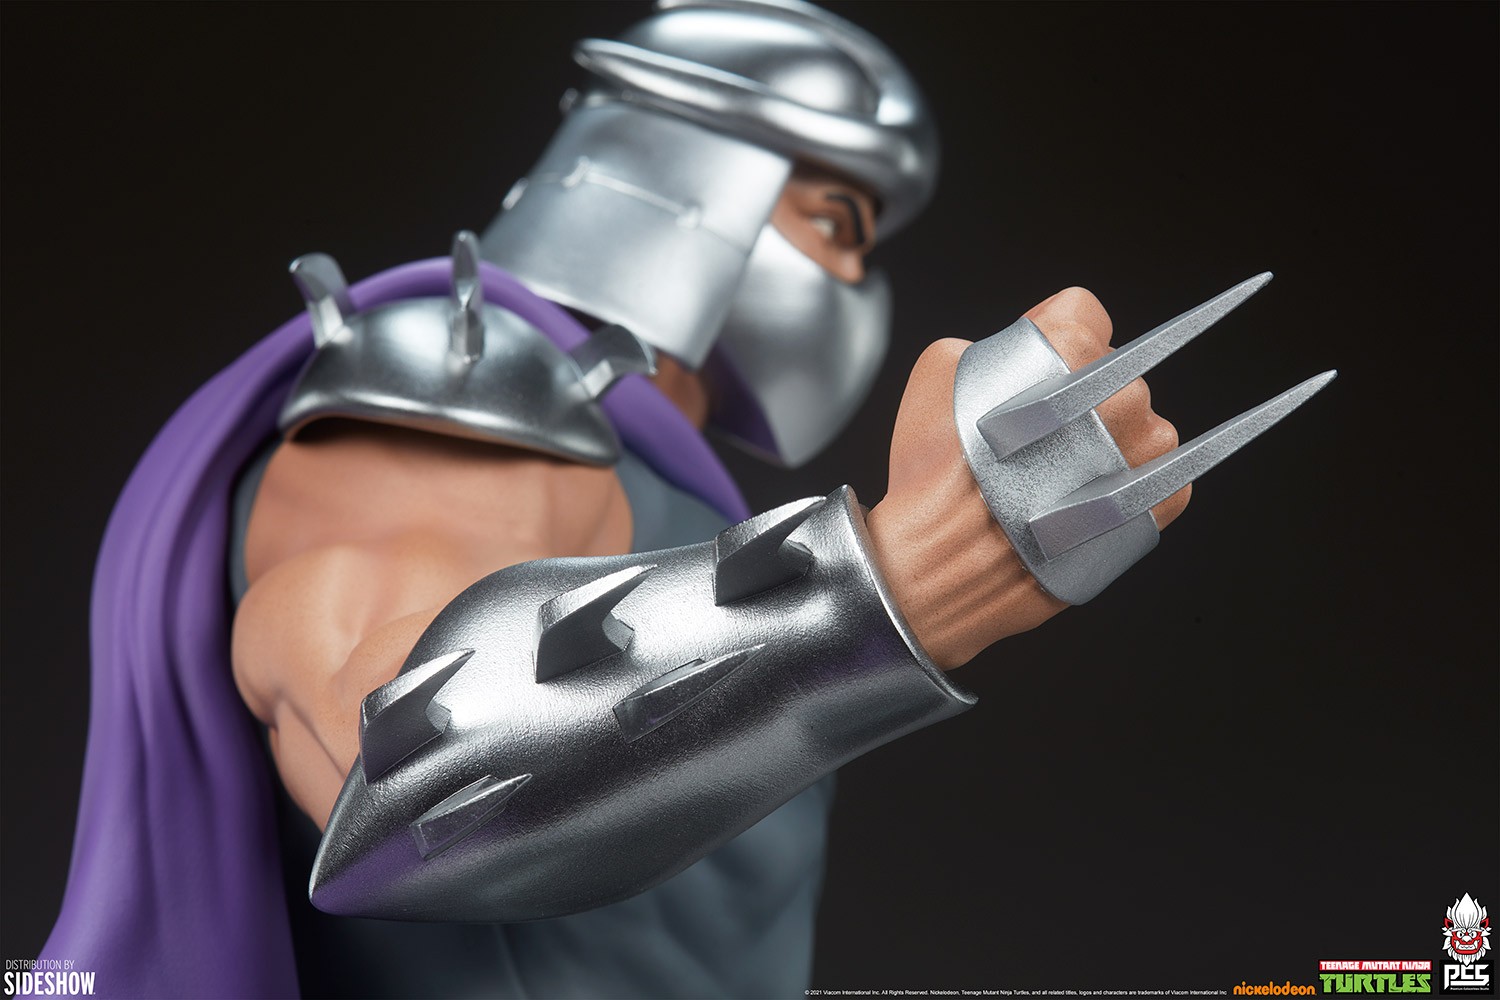 Shredder Exclusive Edition (Prototype Shown) View 8